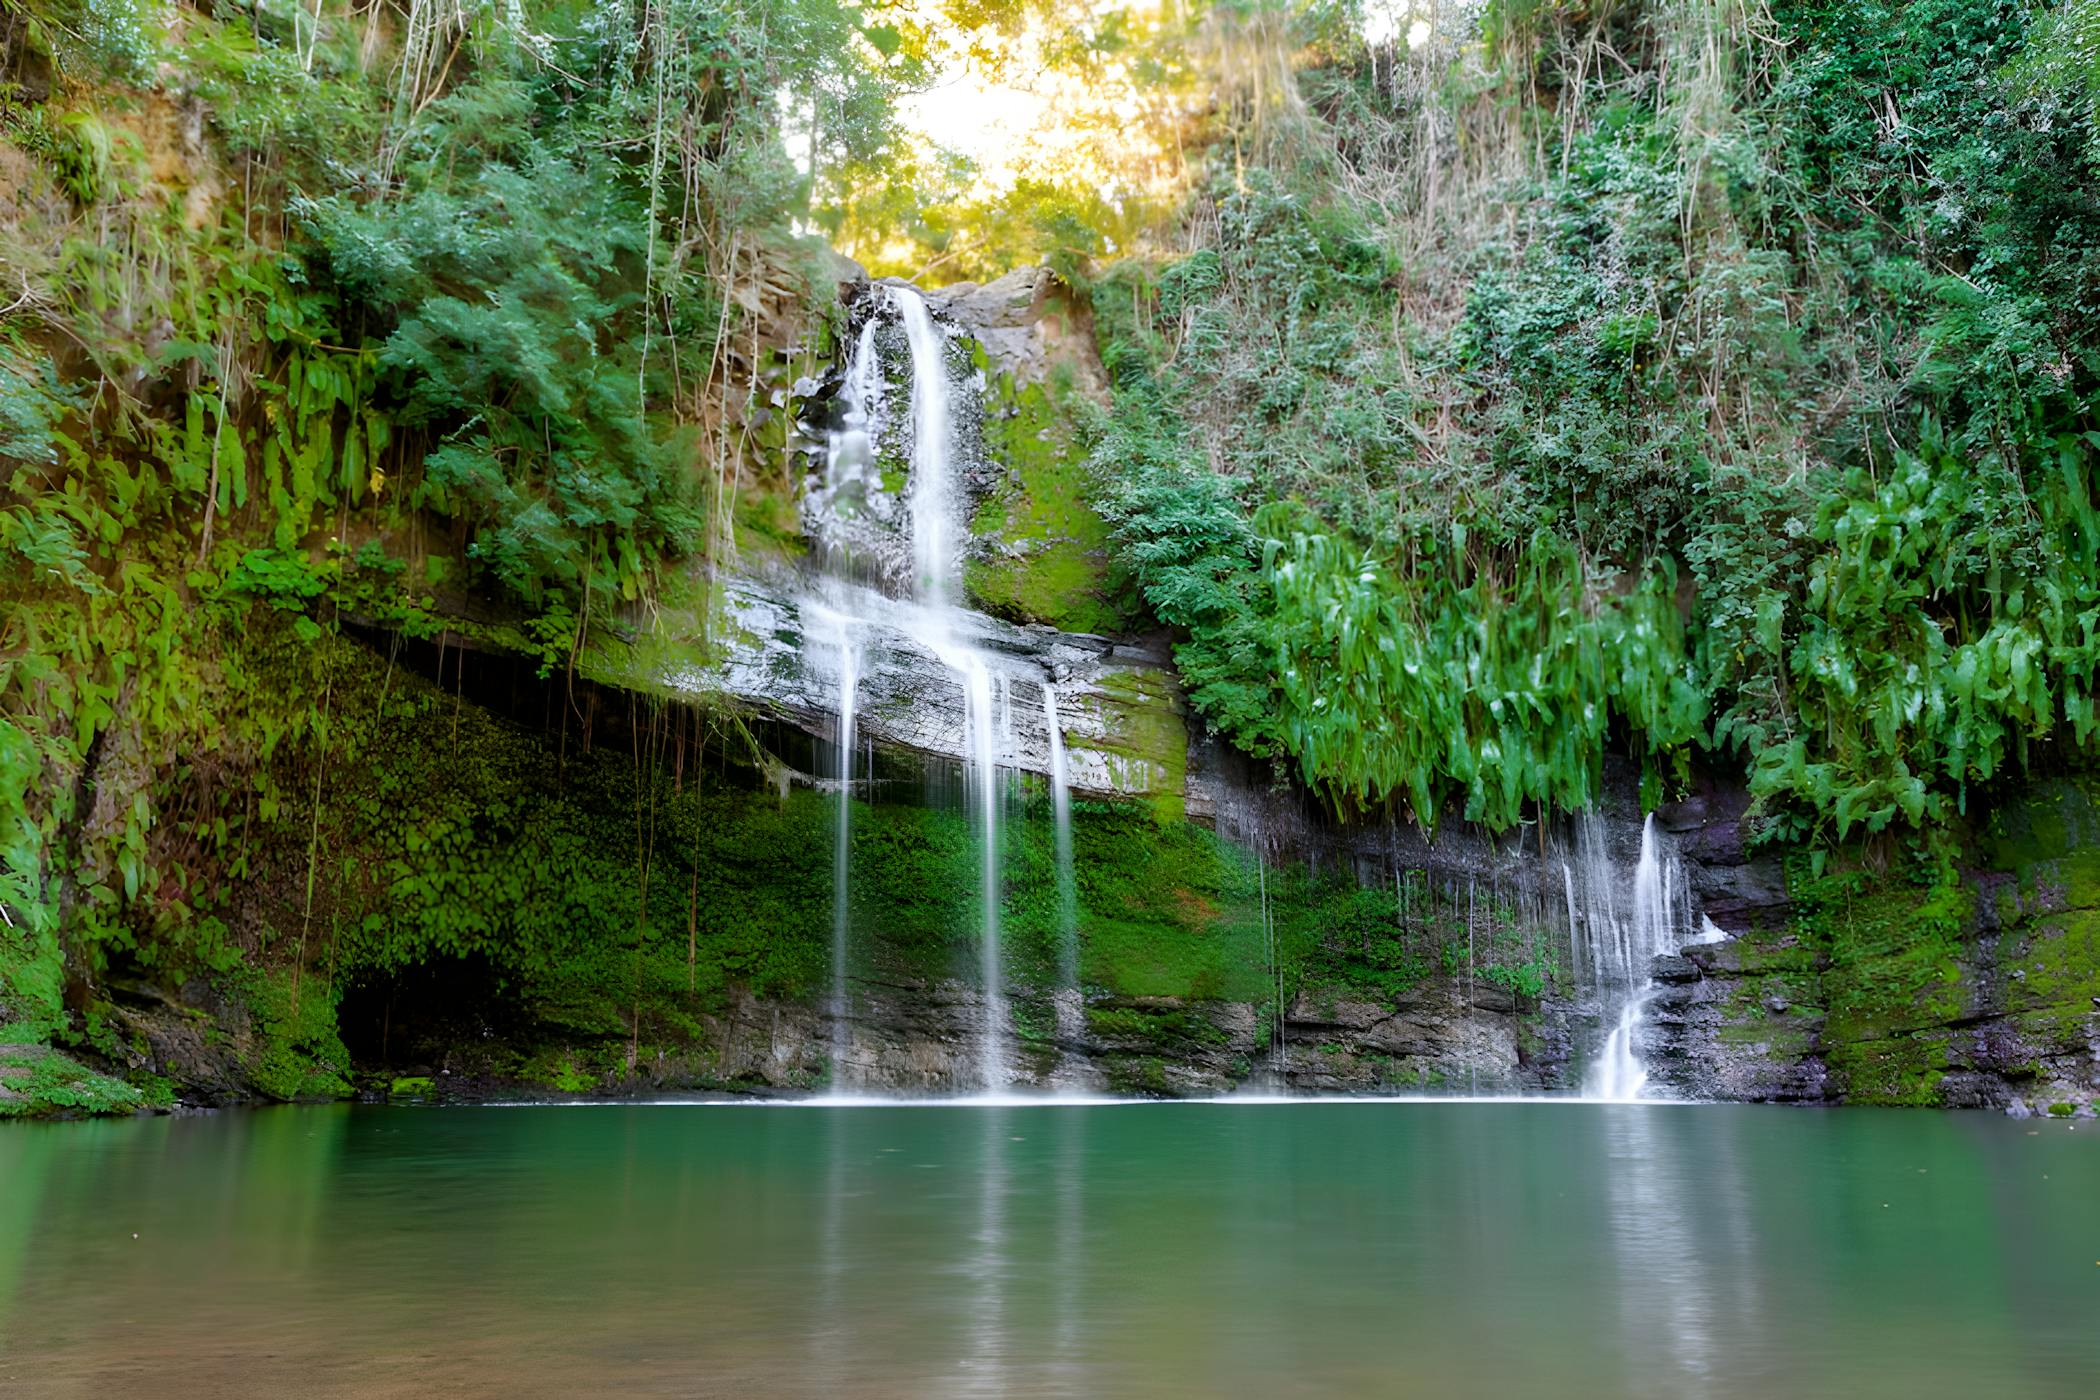 Take a walk to the Namaza forest in Ranohira - enjoy the waterfalls and try to spot the lemurs!